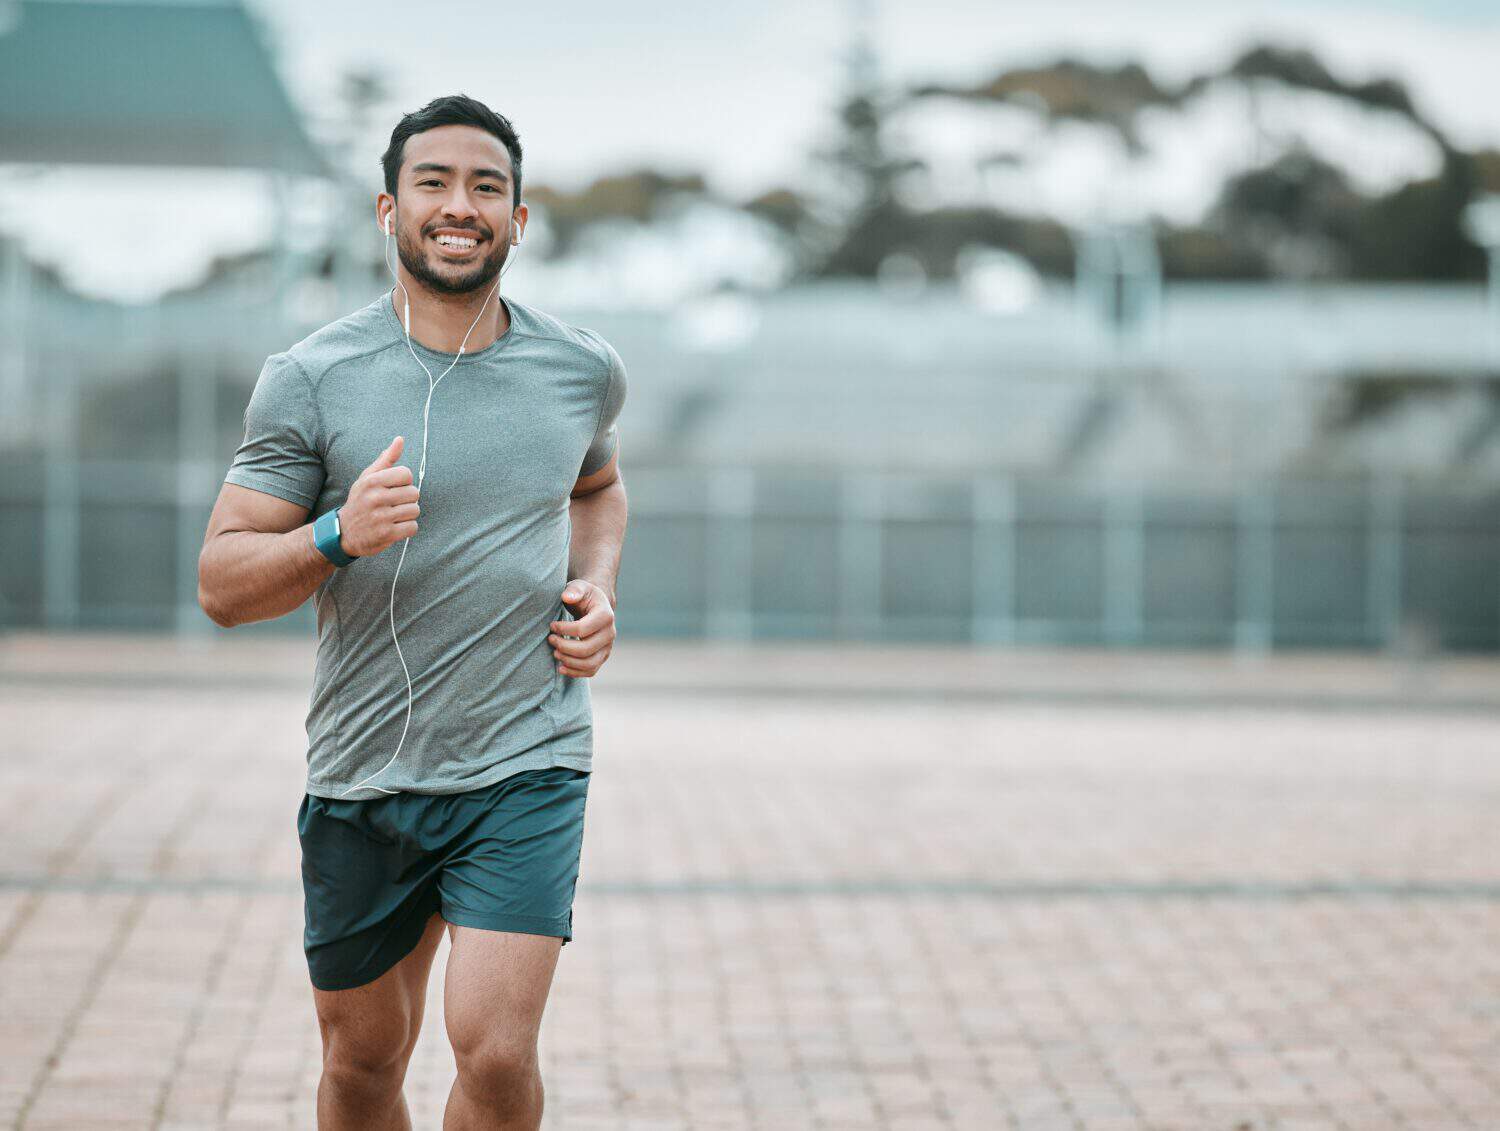 Sports, portrait and male athlete running with earphones for music, radio or podcast for motivation. Fitness, exercise and man runner in outdoor cardio workout routine for race or marathon training.